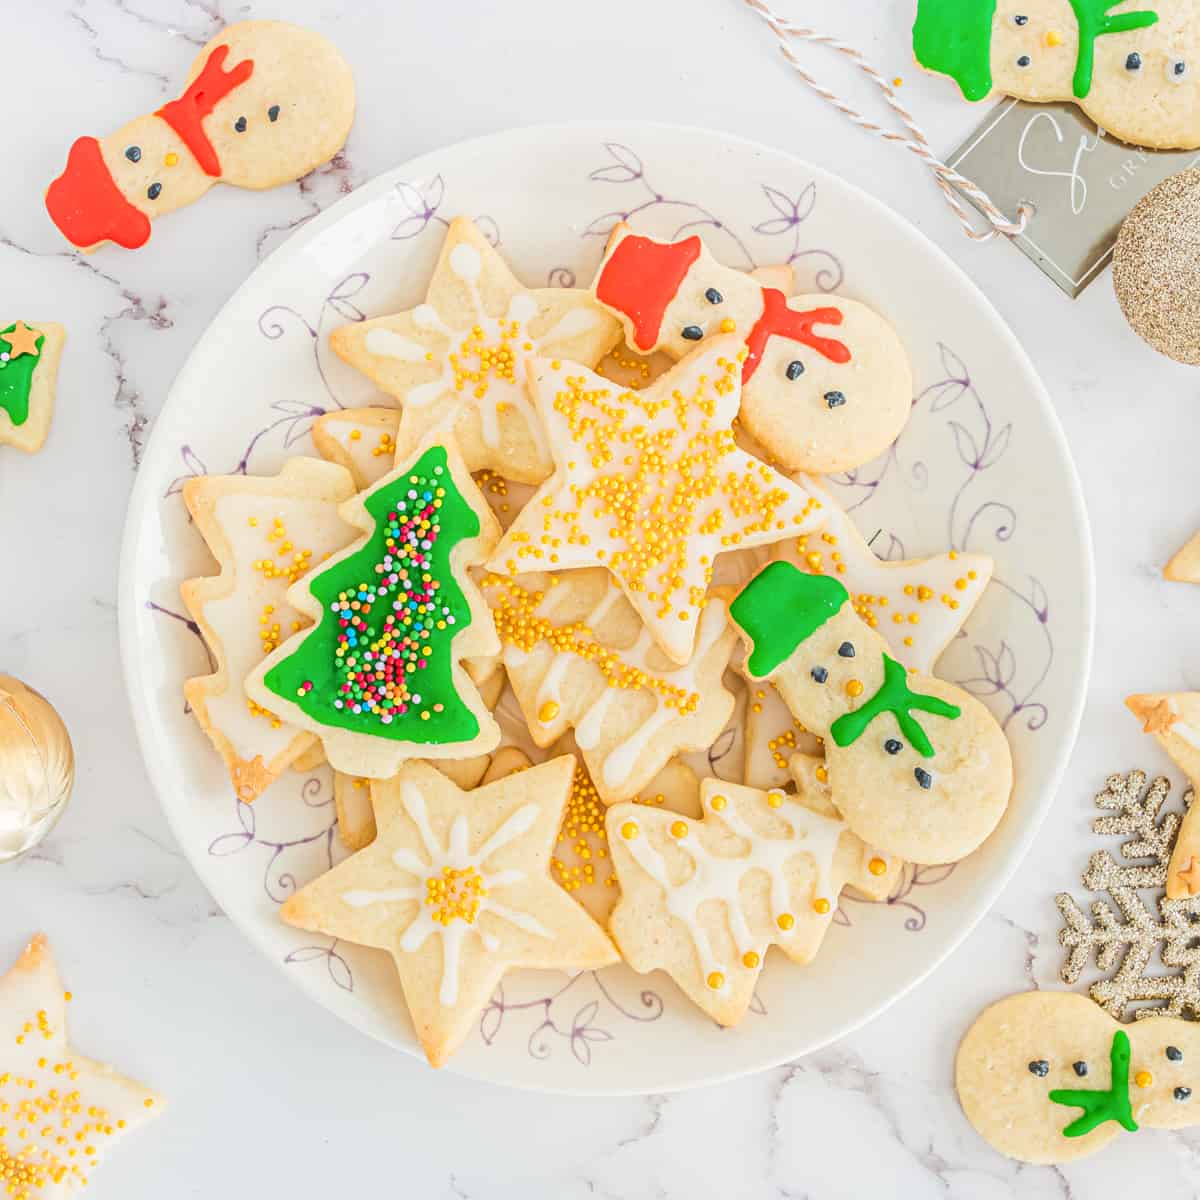 Decorated Christmas sugar cookies with icing and sprinkles on serving plate with additional cookies scattered around table